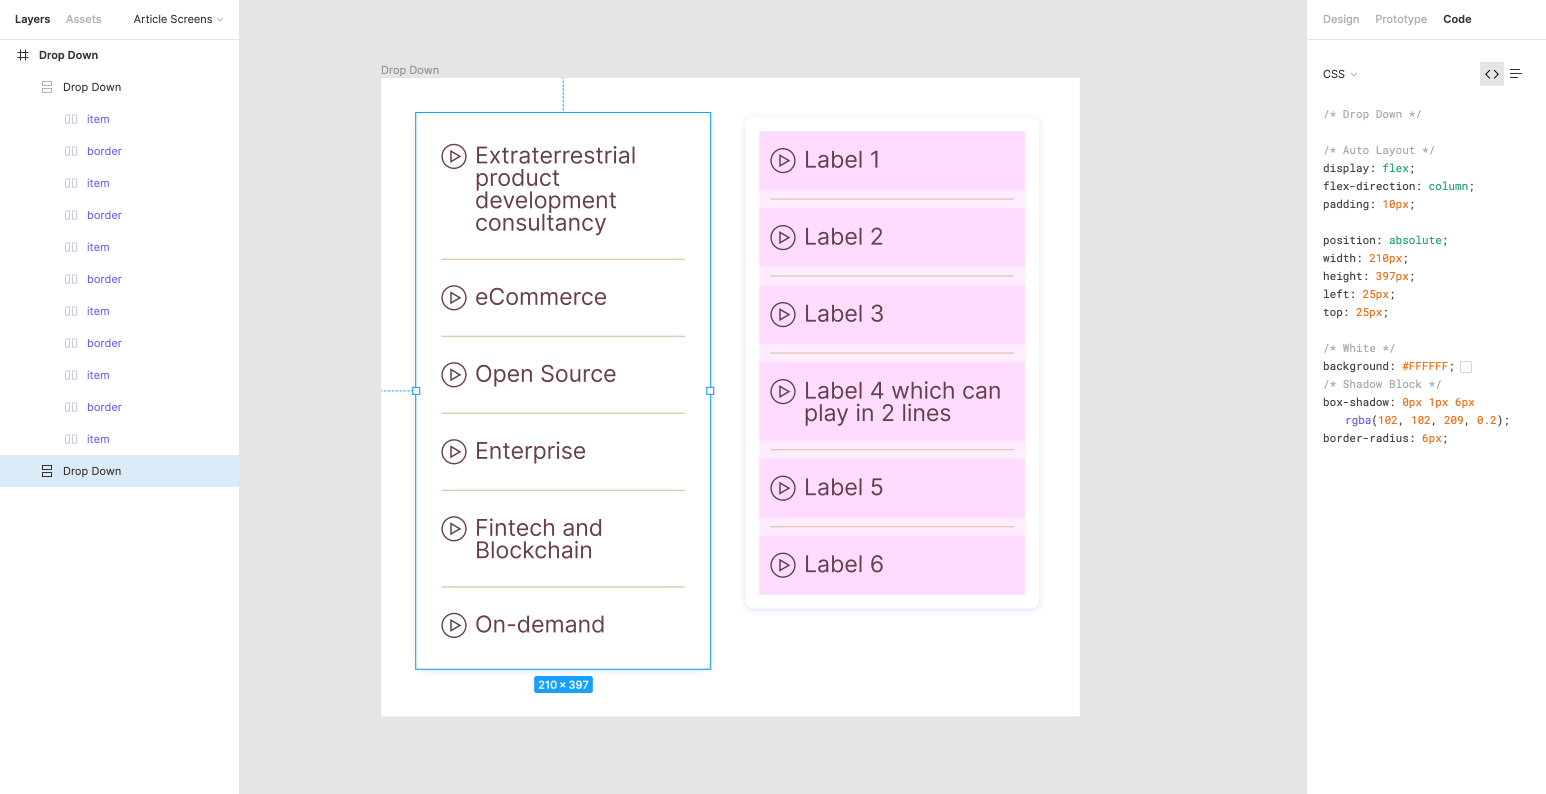 Highly customizable drop-down component that allows to control separators, wrapper, etc.